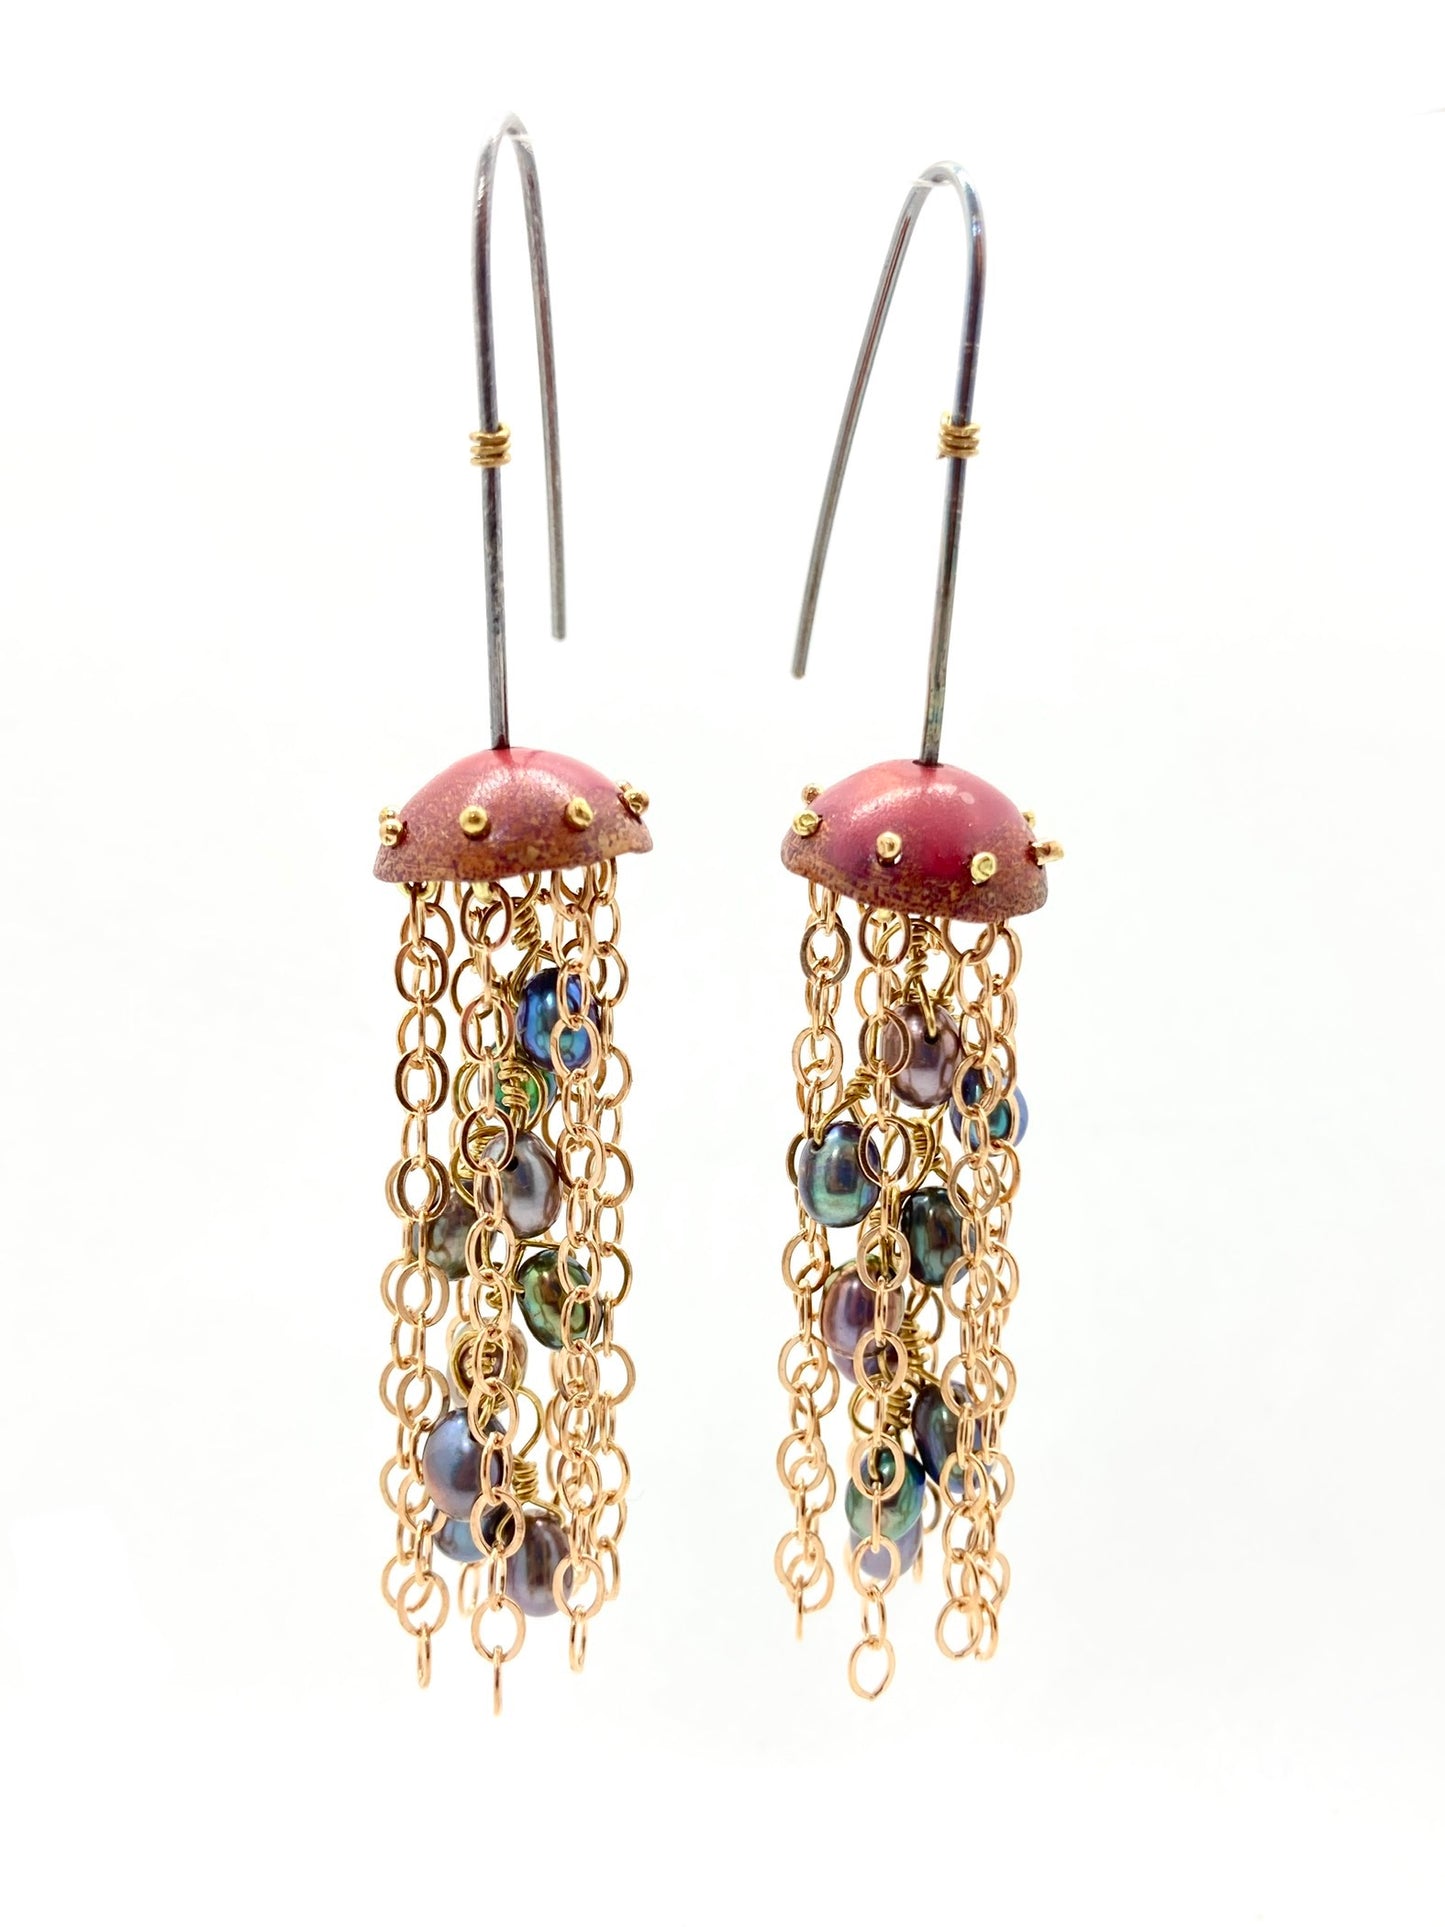 Red Copper Jellyfish Chain Earrings with Pearls and Sterling Silver Earwires